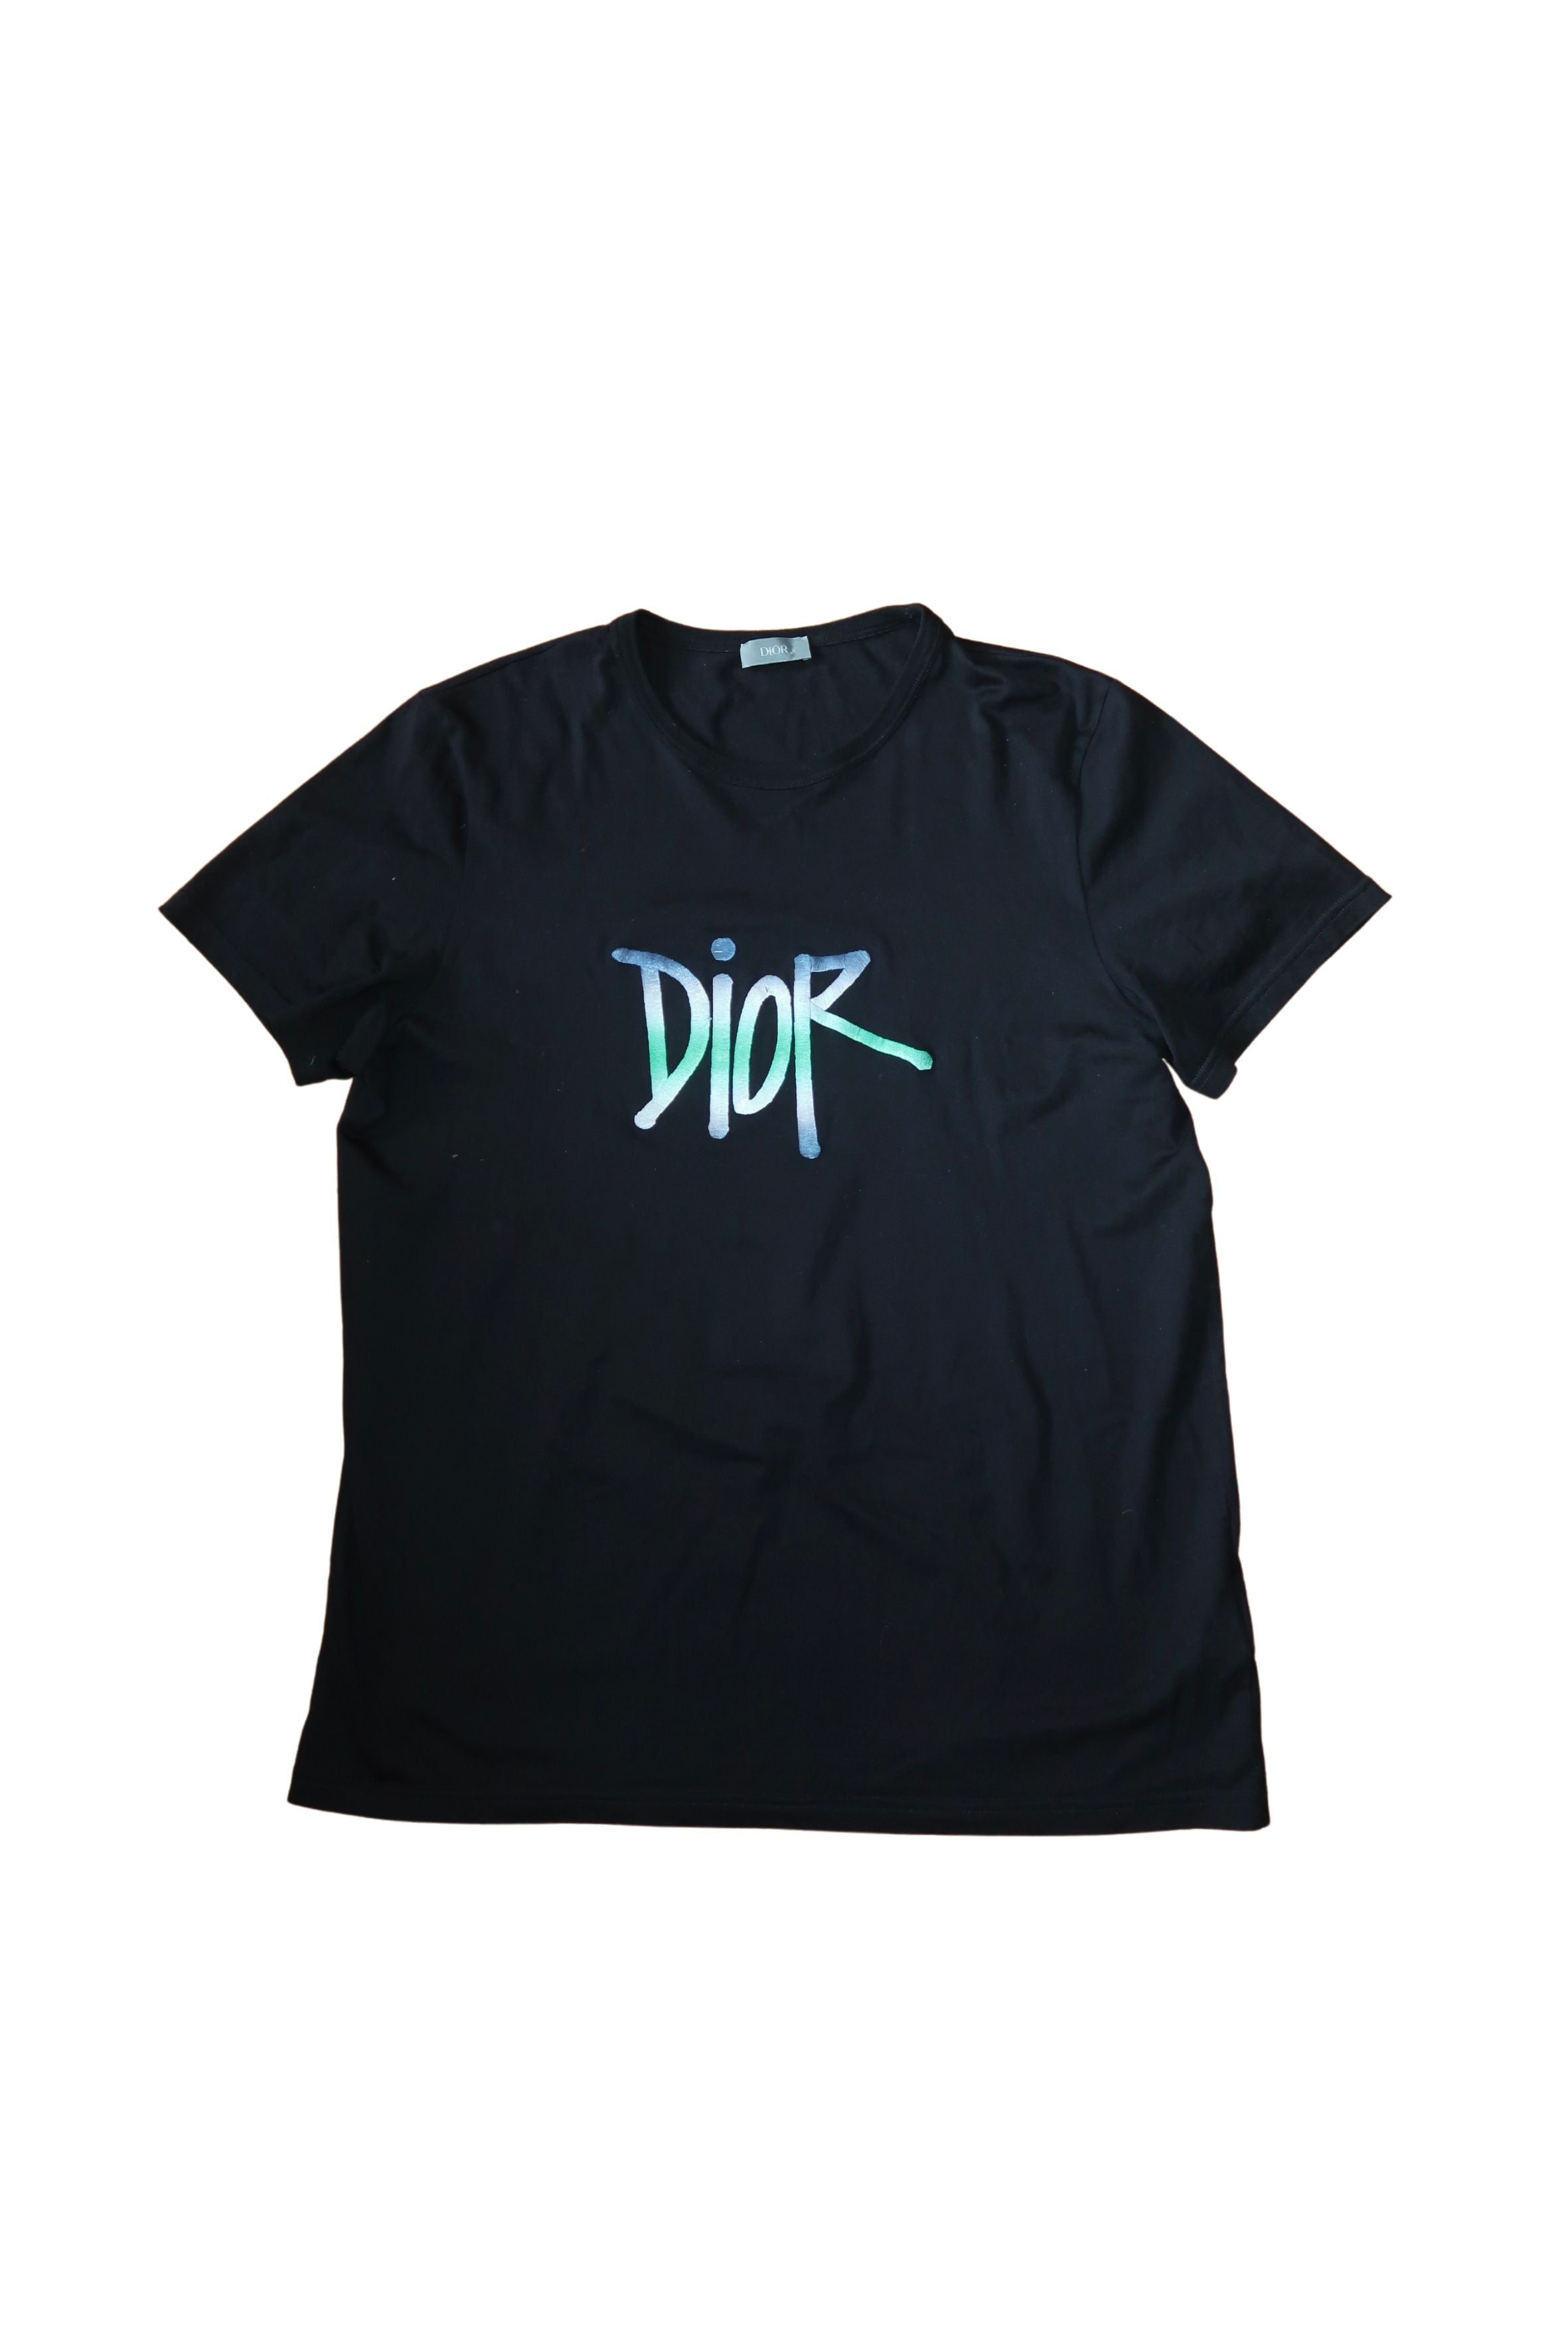 Dior x Shawn Stussy Logo T-Shirt Size Large – Curated by Charbel